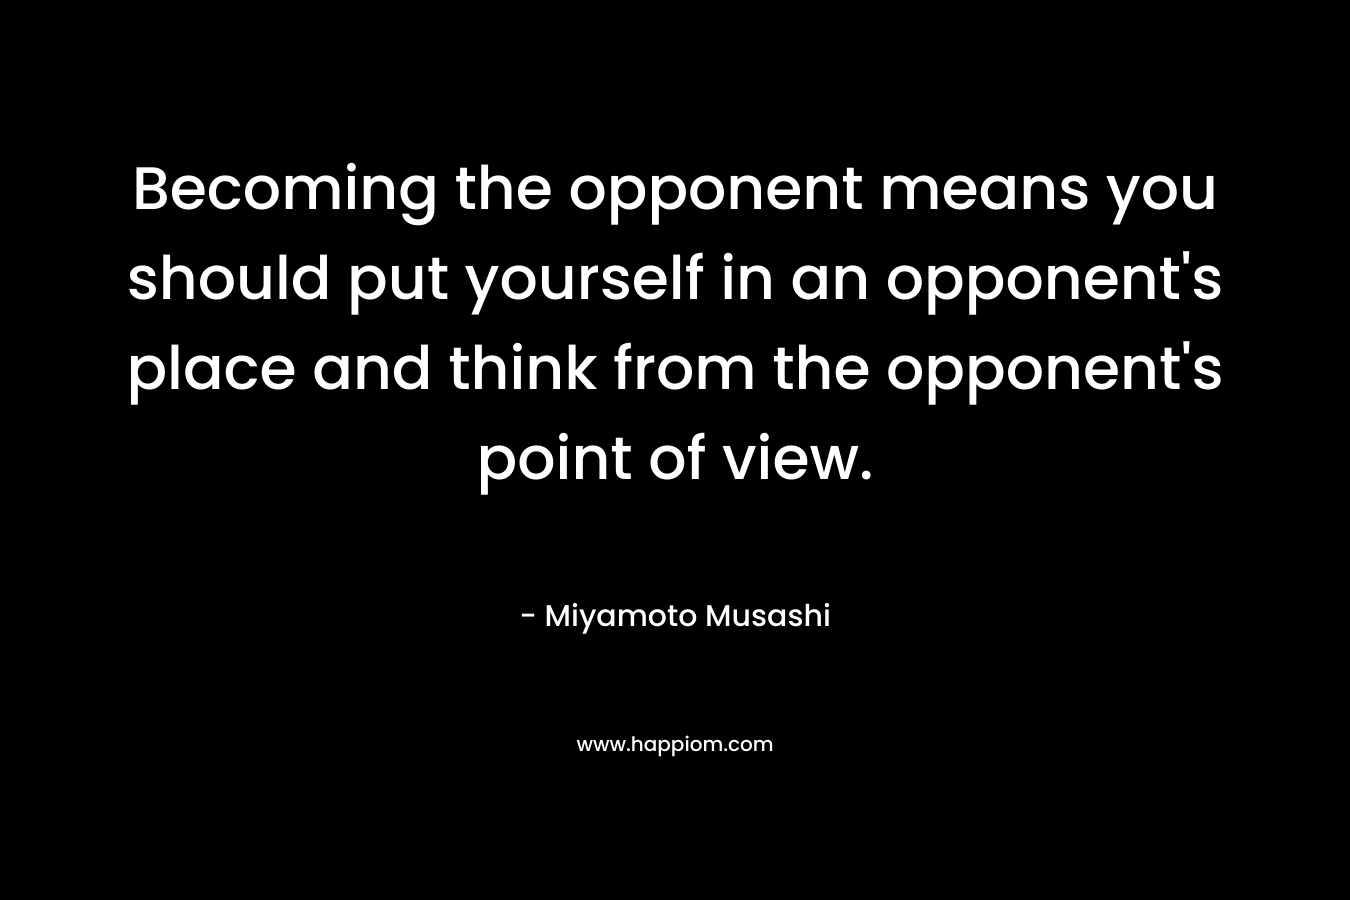 Becoming the opponent means you should put yourself in an opponent's place and think from the opponent's point of view.